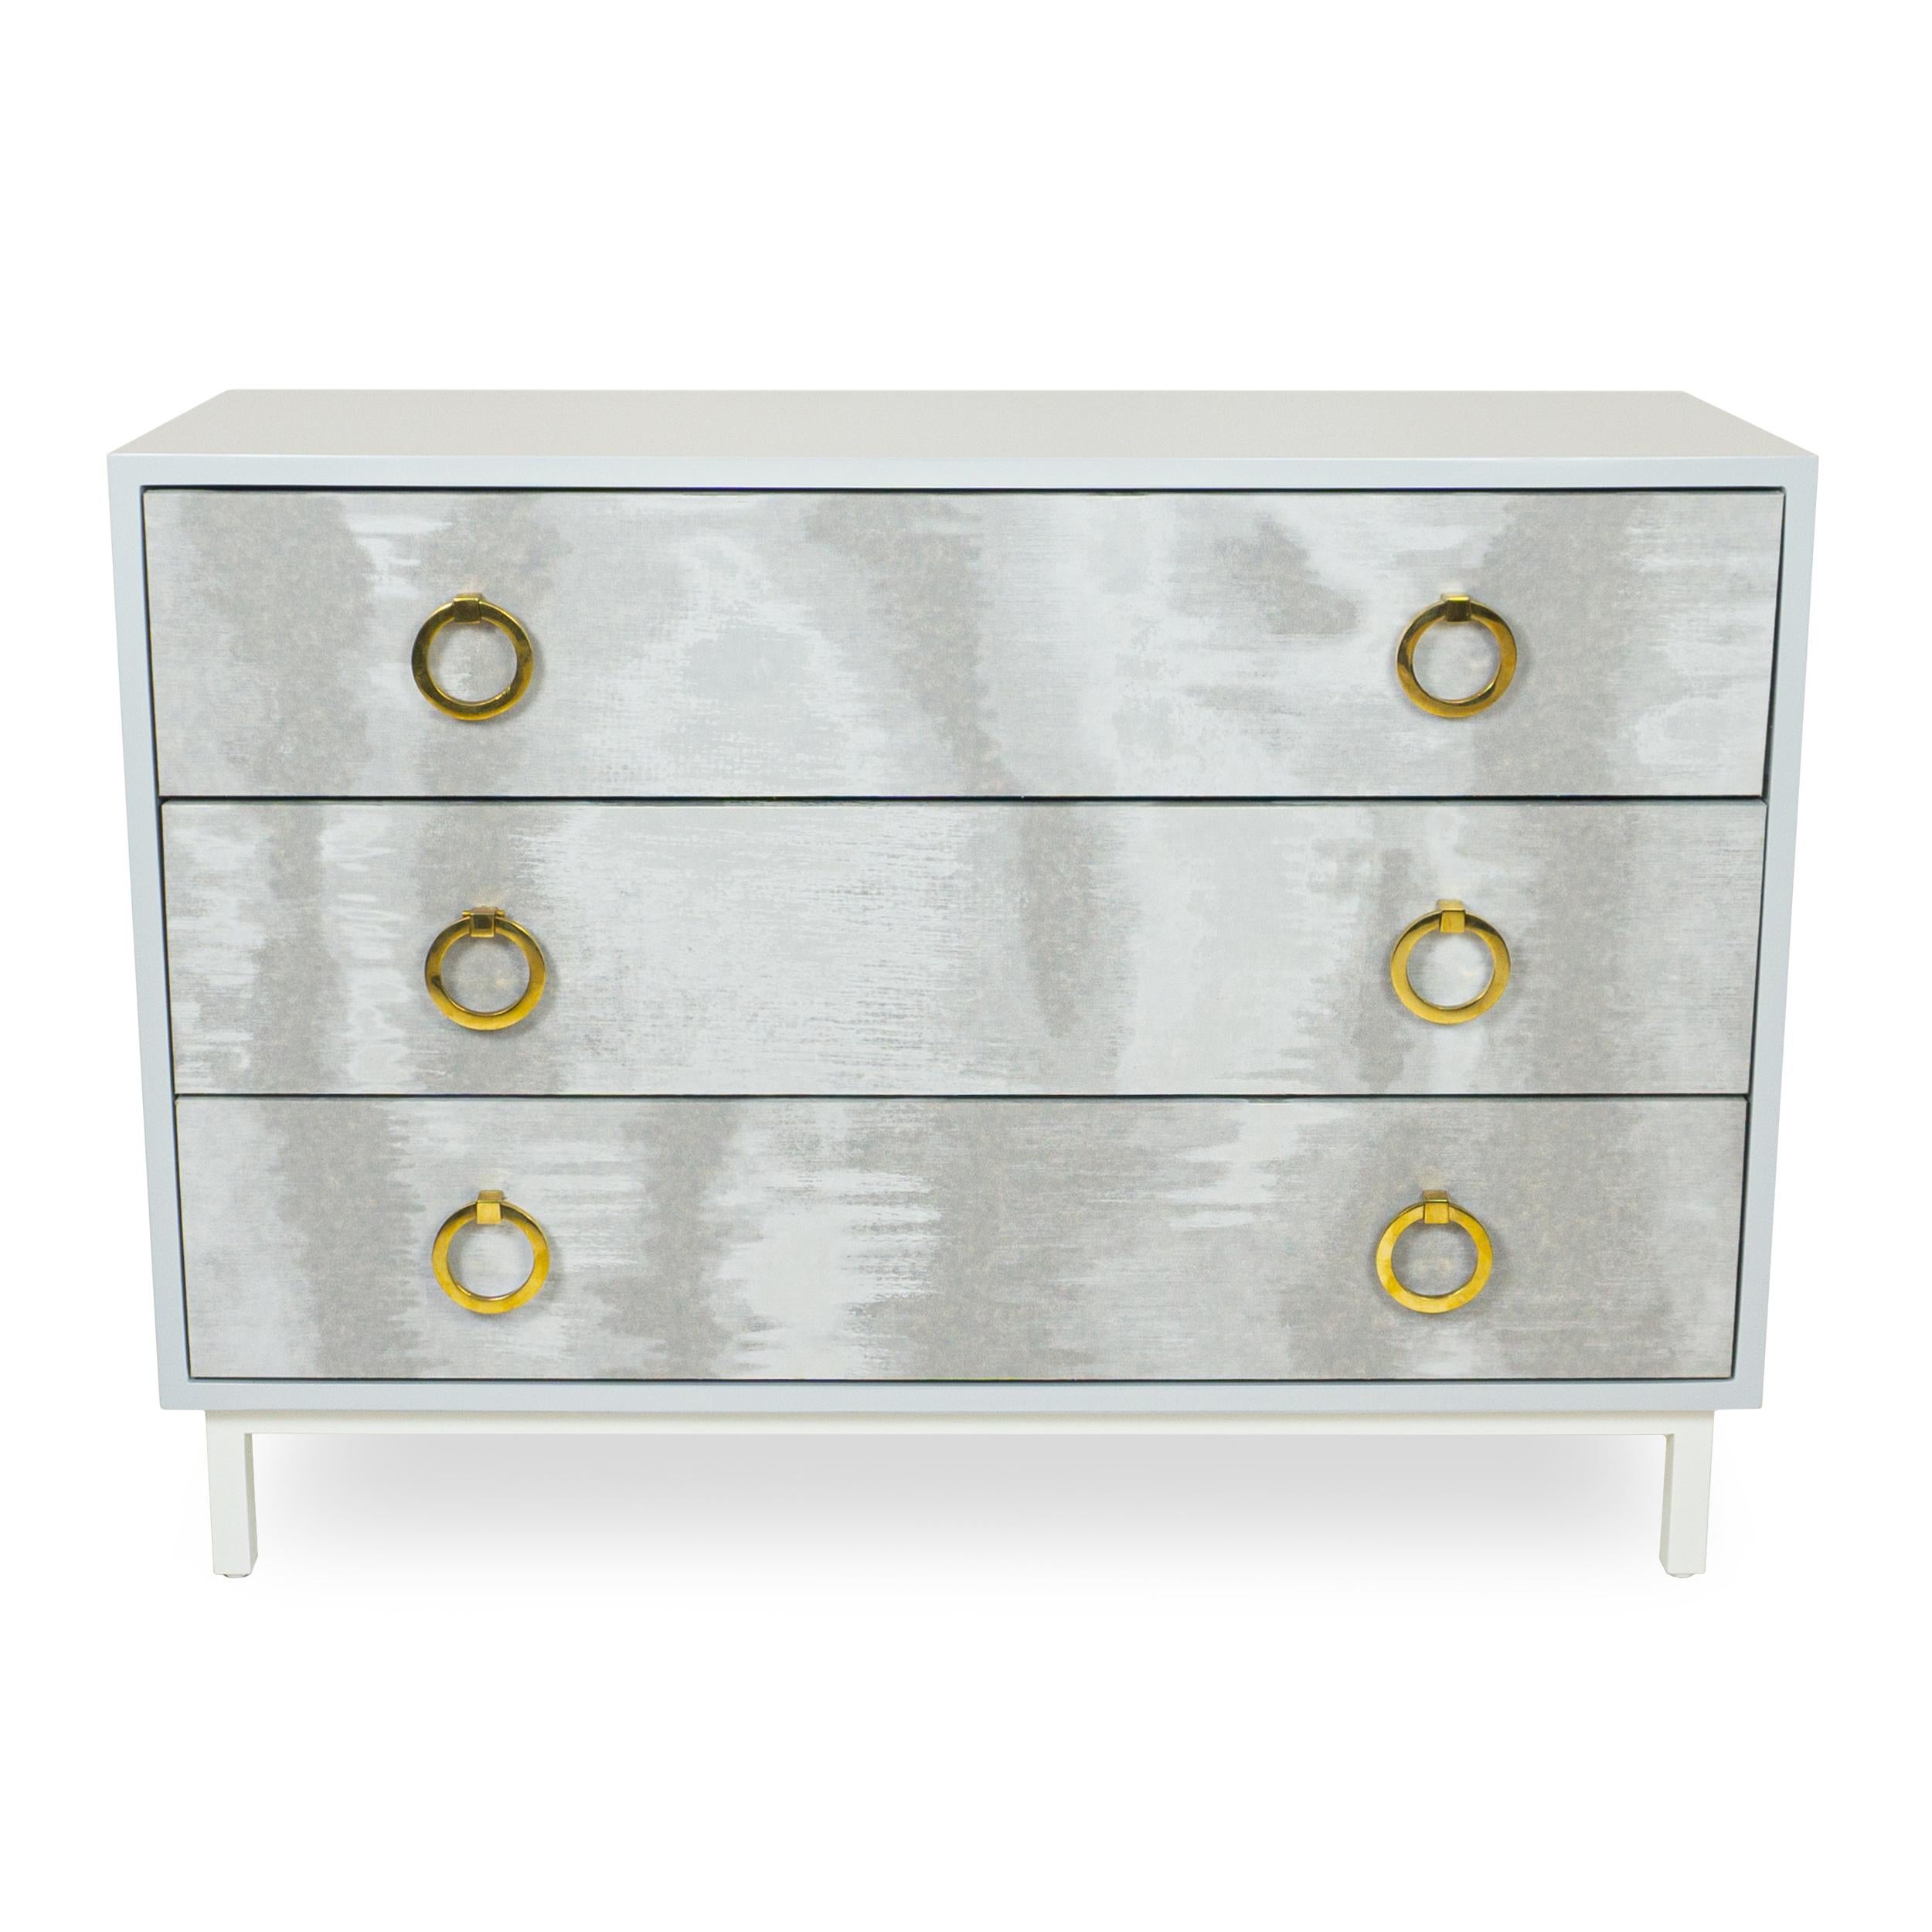 Chest of three drawers (dresser, bedside, hall table) lacquered light blue. Drawer faces finished with subtly shiny moire material and with round gold pulls. Slow close hardware. Base lacquered white.

Measurements:
Overall: 42”W x 15.5”D x